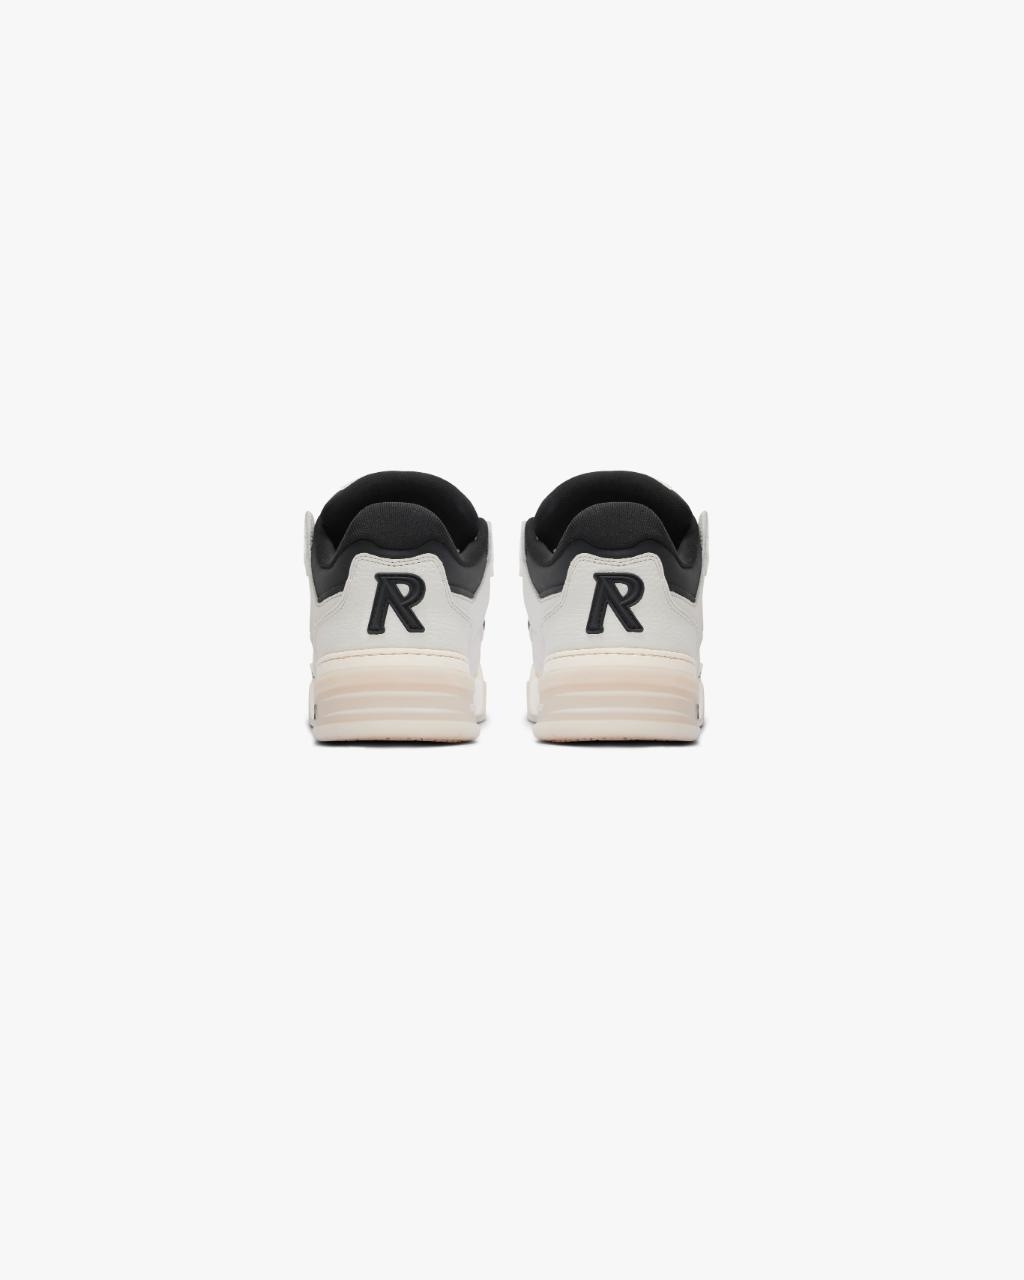 Rear view of a pair of sneakers with prominent &#x27;R&#x27; logo on the back